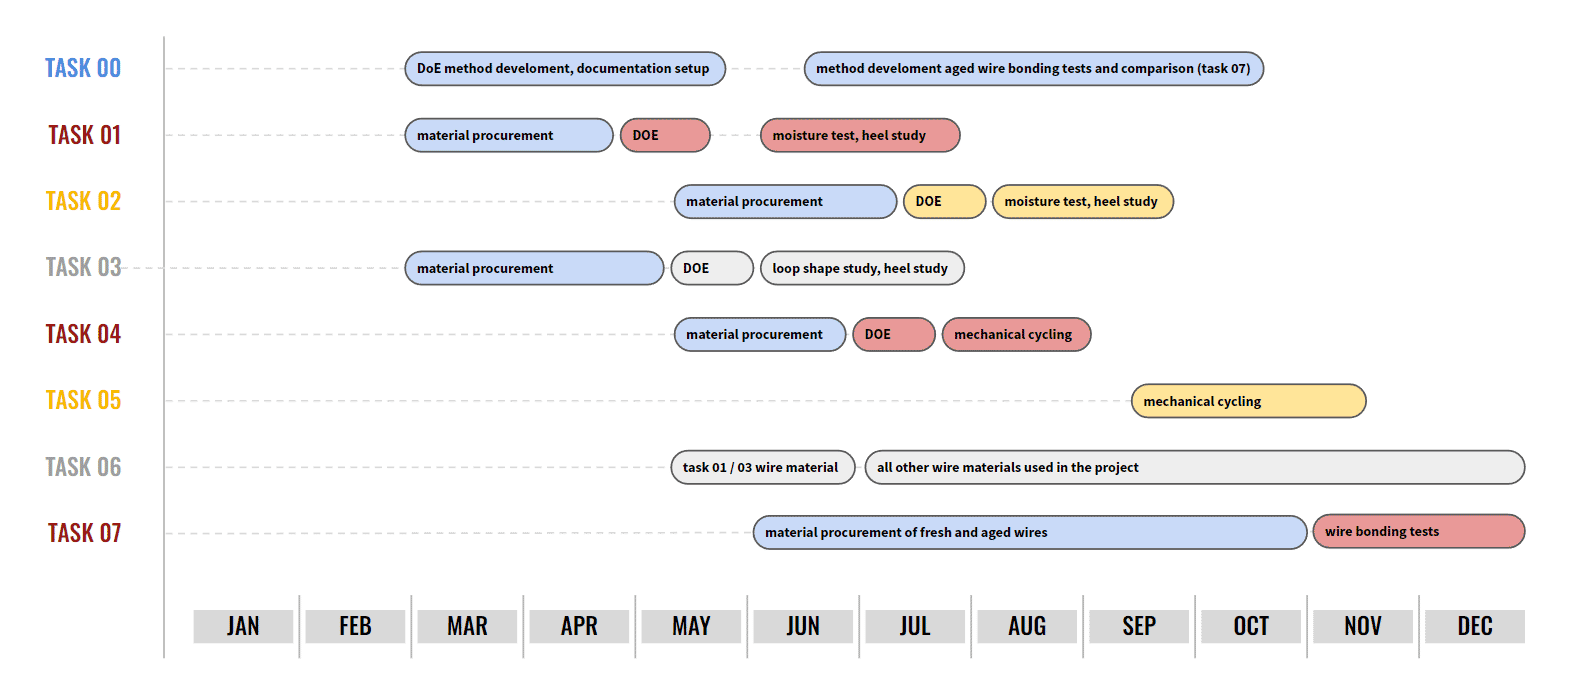 Schedule of the individual tasks of the QUALSi project performed by Bond-IQ GmbH